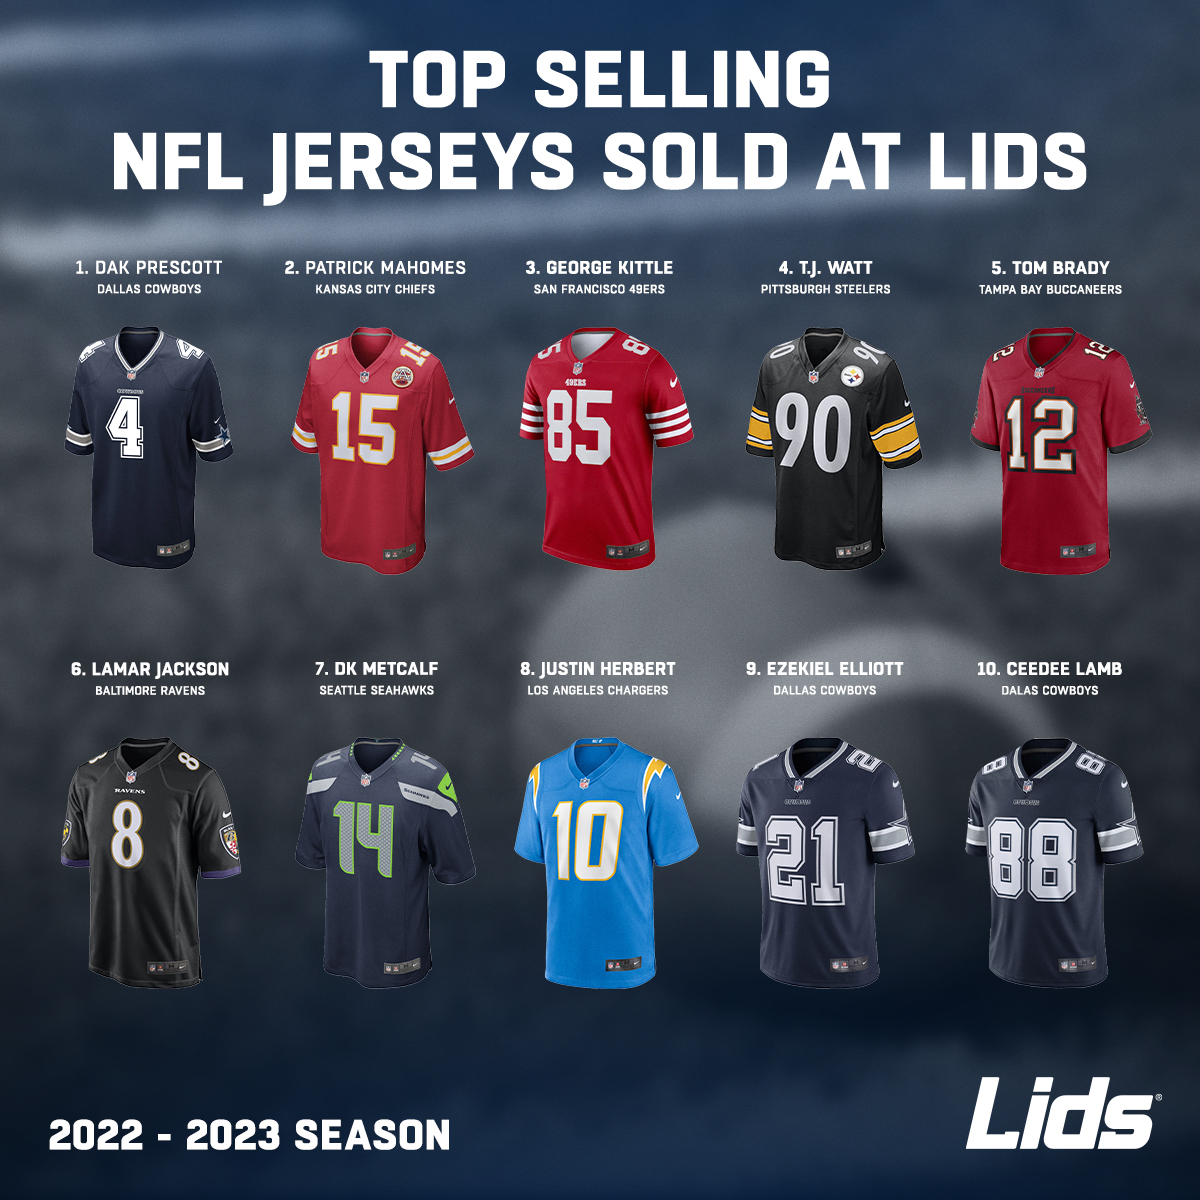 number 1 selling nfl jersey